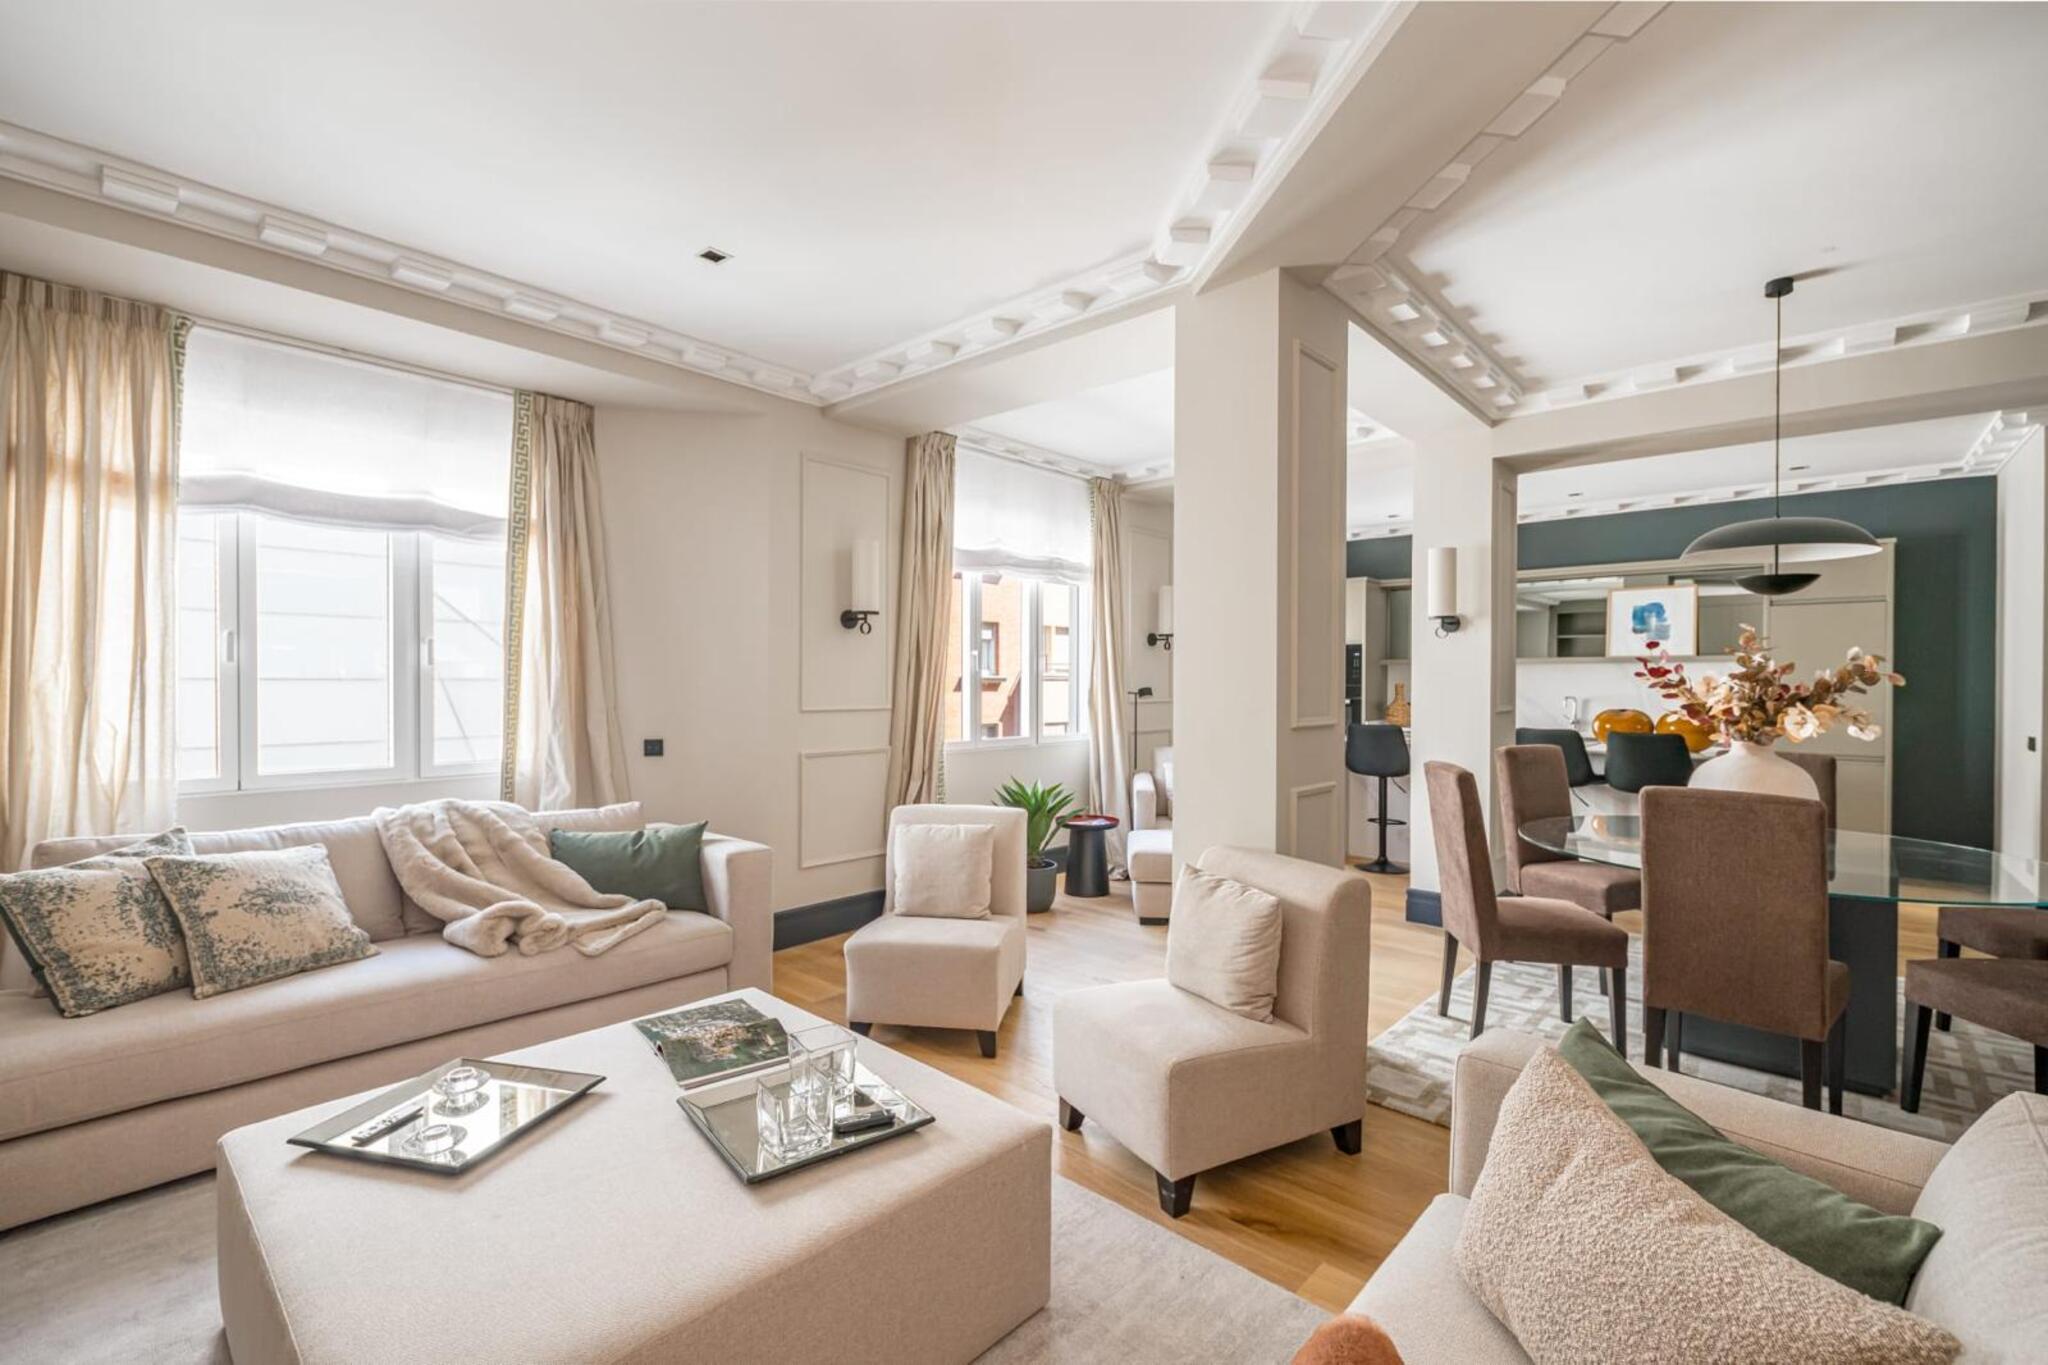 Located in the heart of Madrid, this luxurious apartment offers an exclusive lif